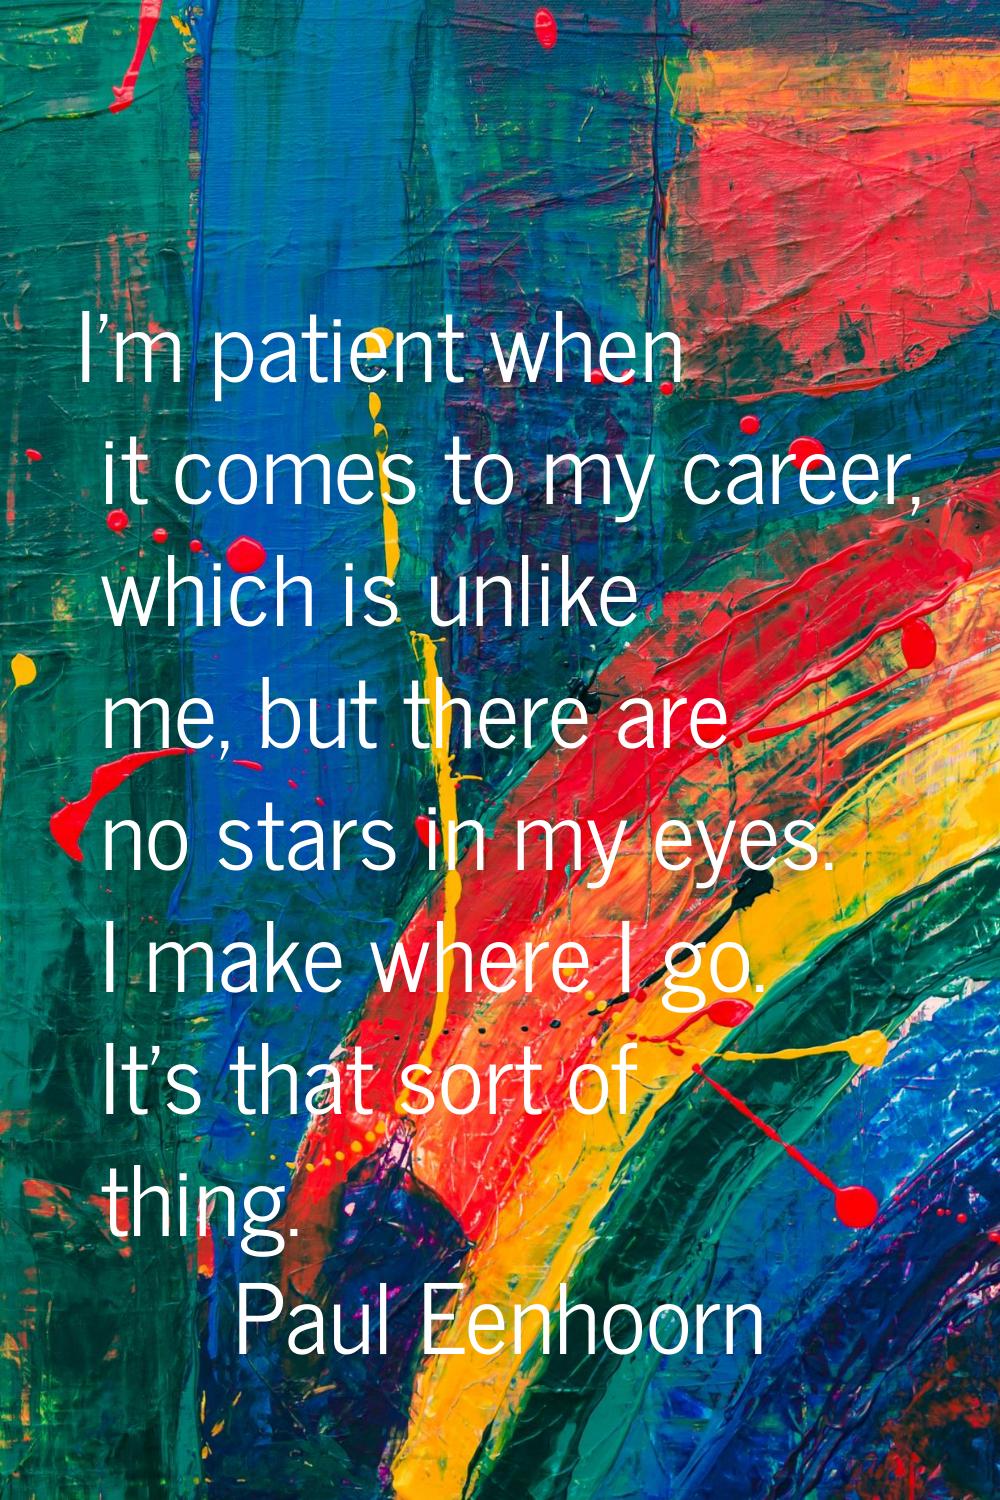 I'm patient when it comes to my career, which is unlike me, but there are no stars in my eyes. I ma